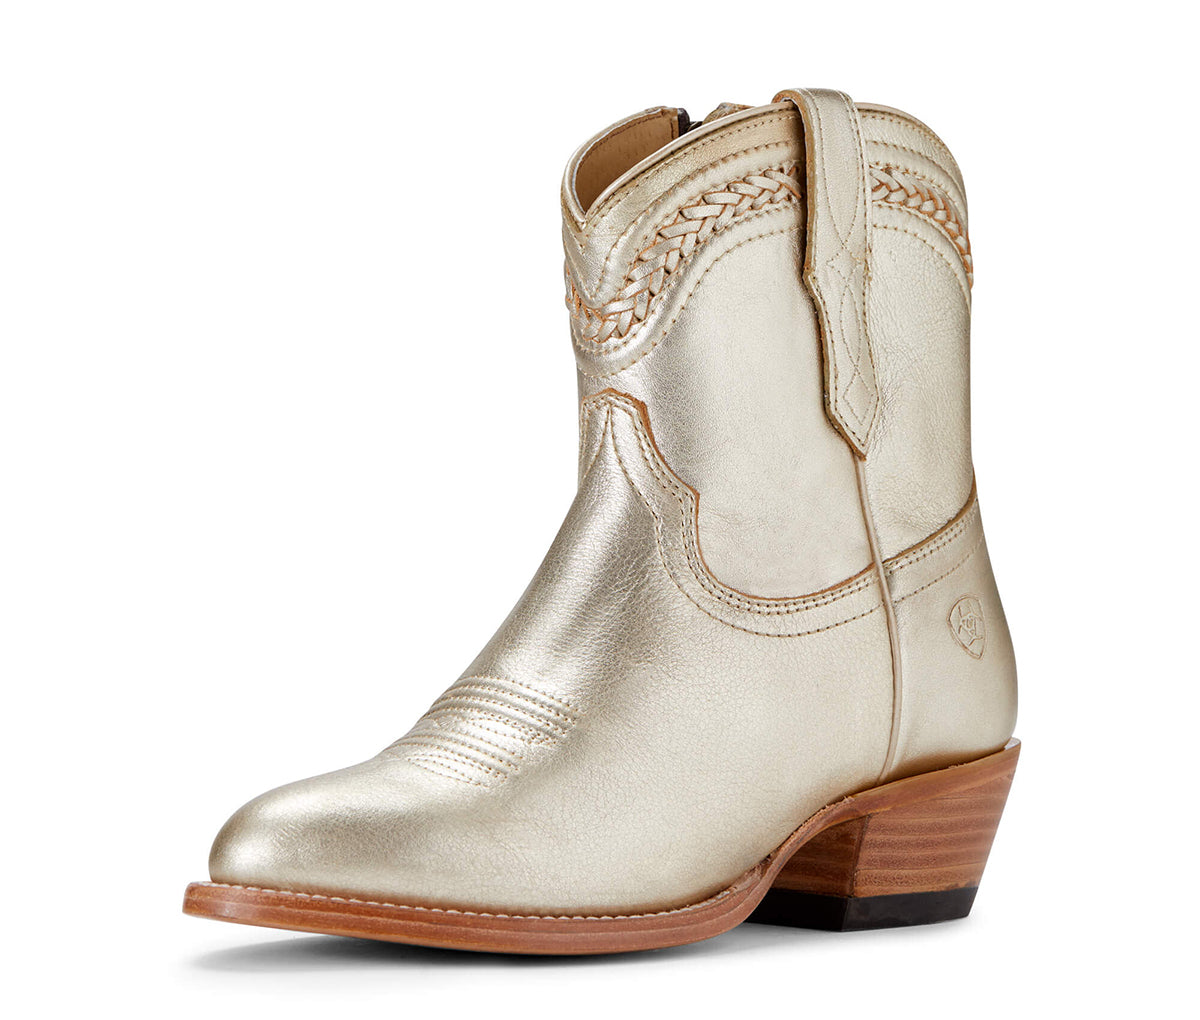 Women's Ariat Legacy R Toe Western Boot in Metallic Gold from the front